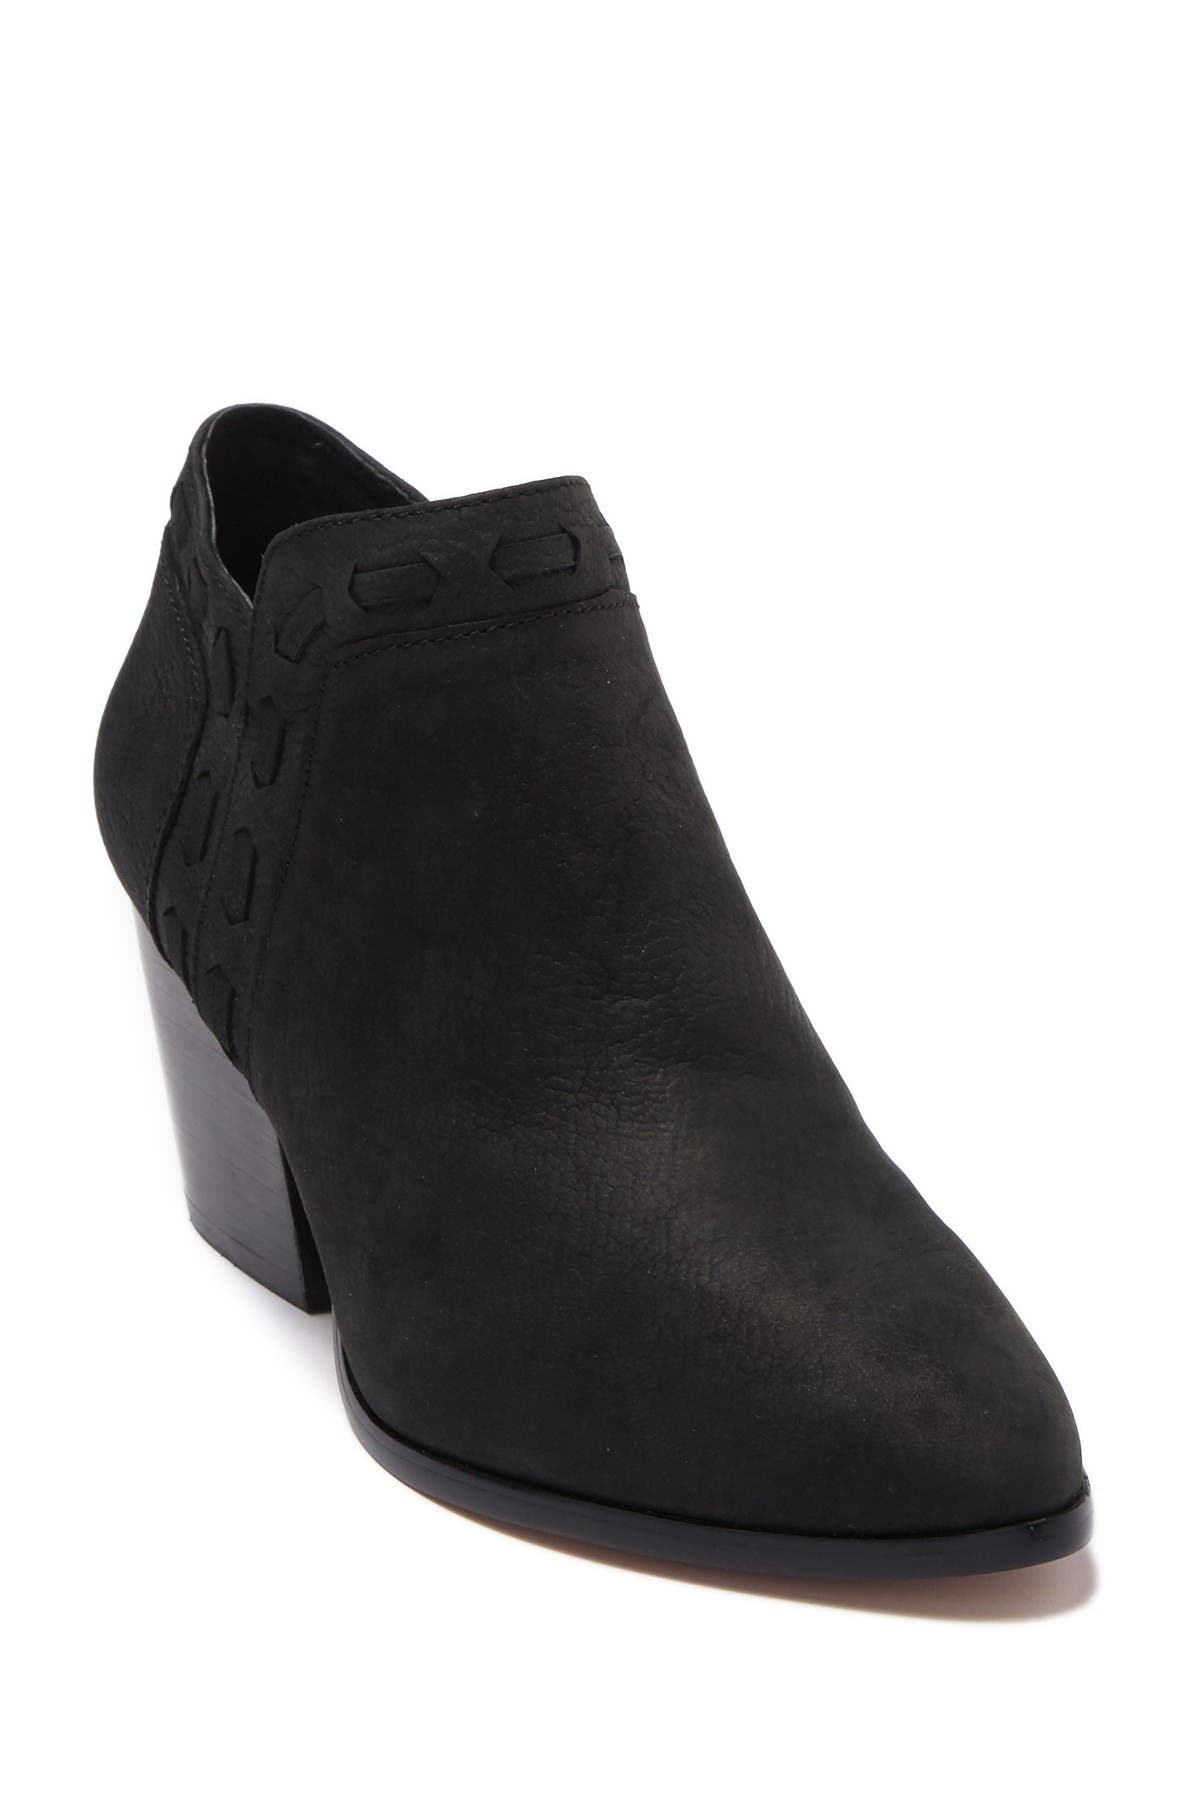 vince camuto vemmey booties